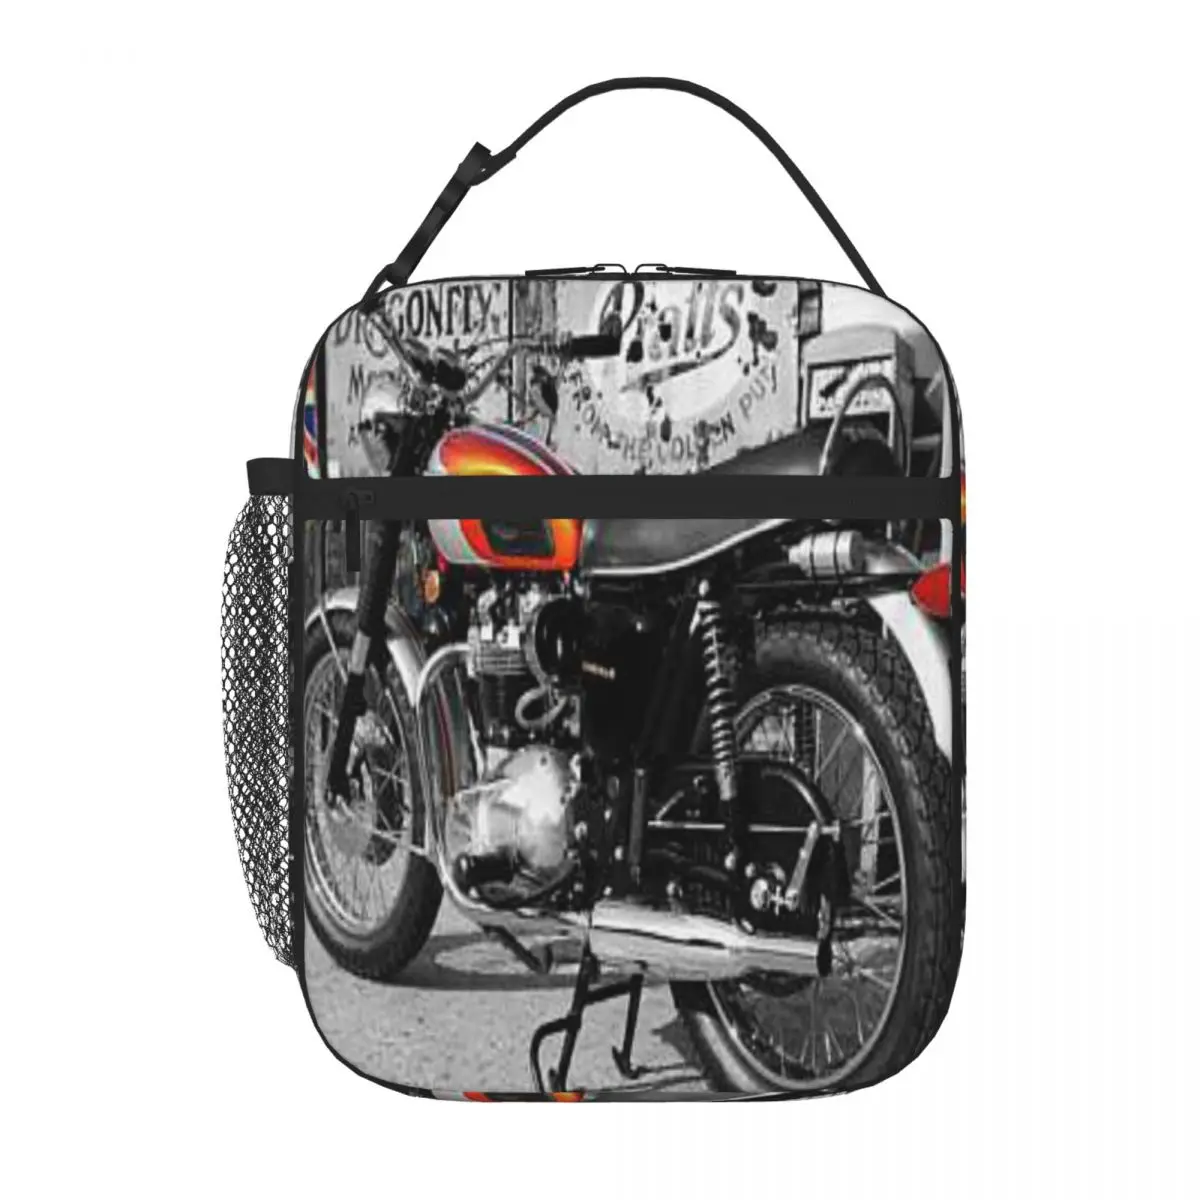 

The T120 Bonneville 69 Mark Rogan Lunch Tote Lunchbox Thermal Lunchbox Women'S Lunch Bags